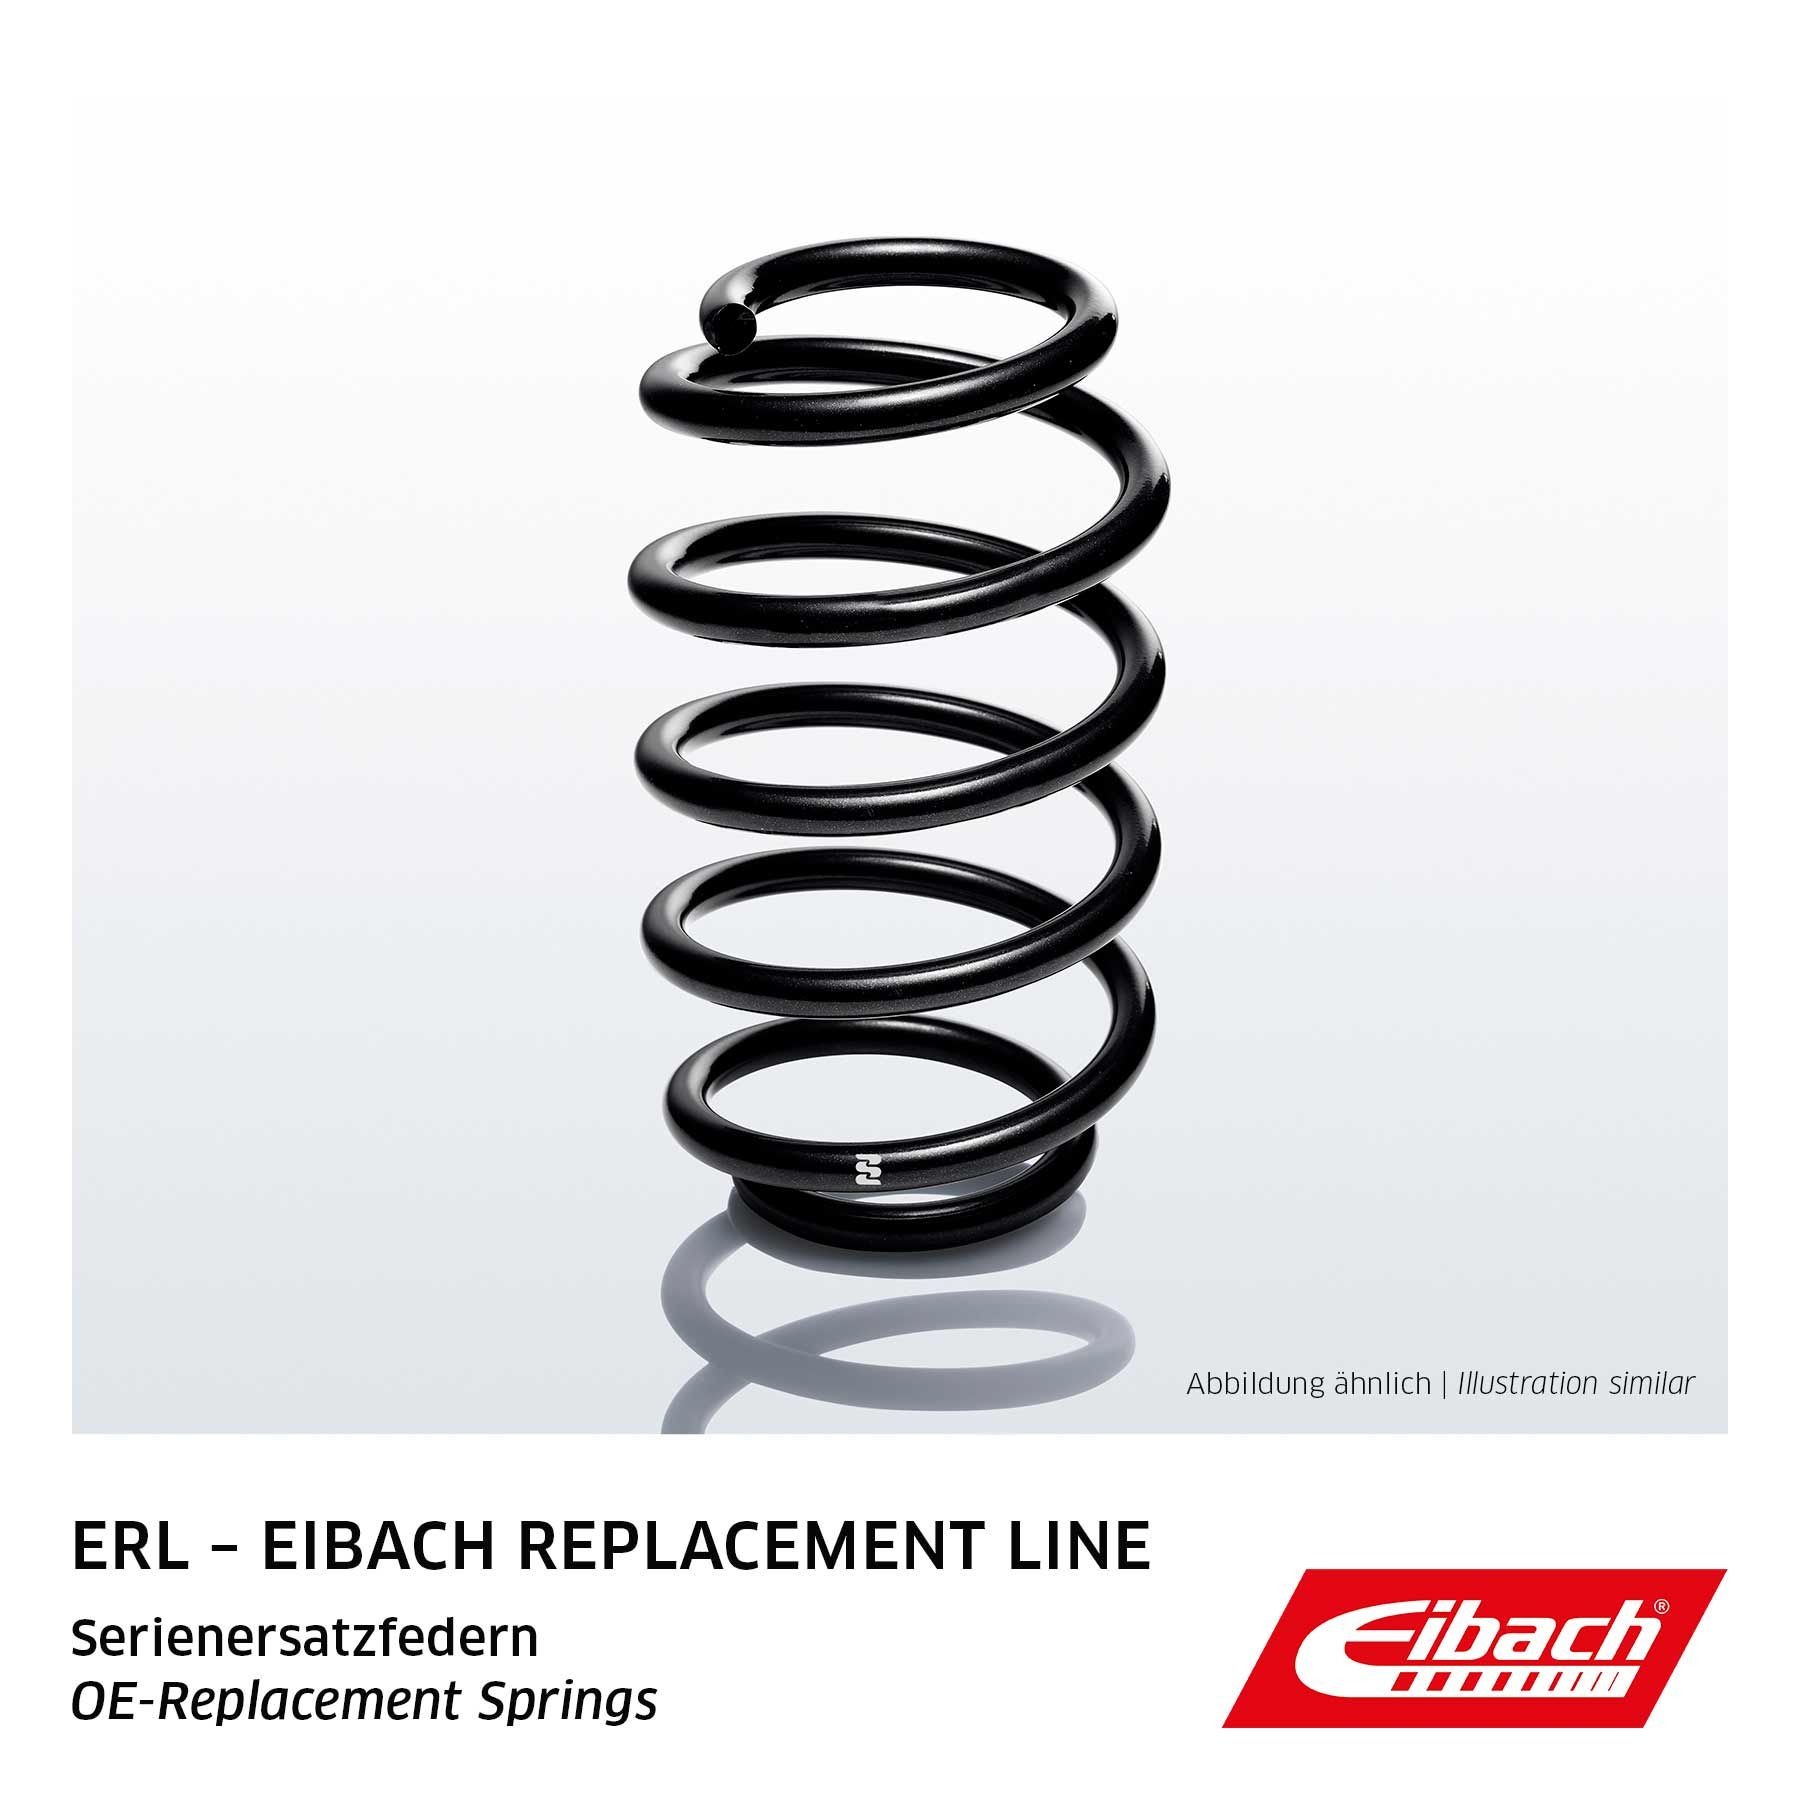 EIBACH Single Spring ERL (OE-Replacement) R10146 Coil spring Rear Axle, Coil Spring, for vehicles with standard suspension